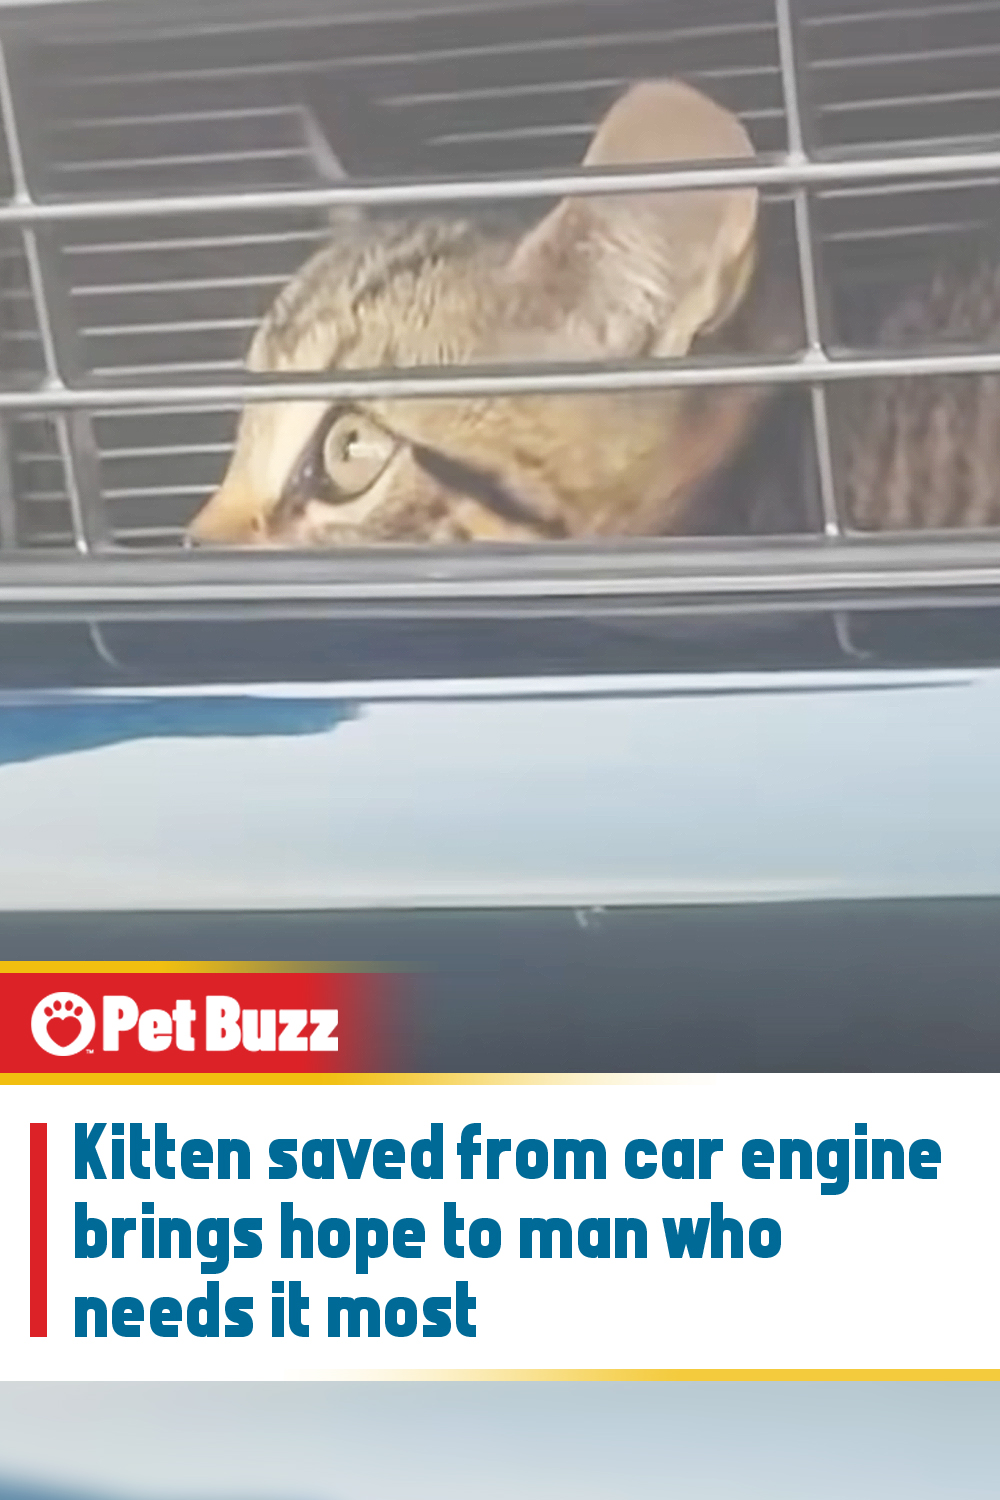 Kitten saved from car engine brings hope to man who needs it most